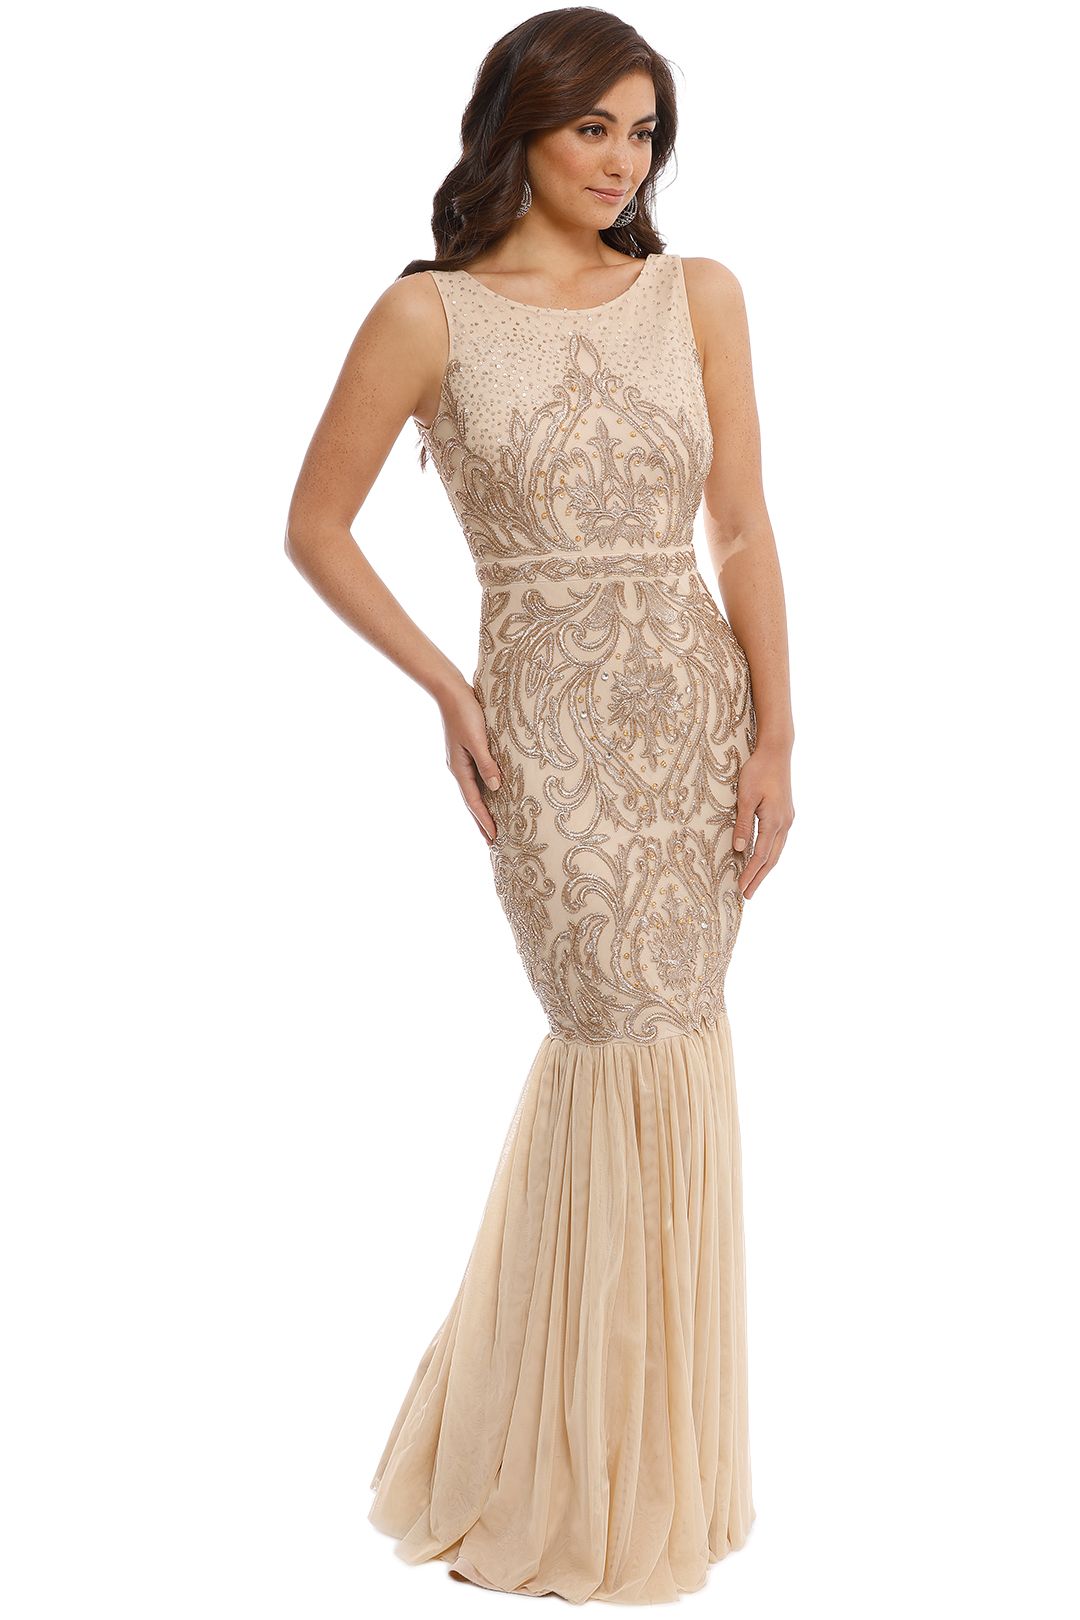 Badgley Mischka - Champagne Beaded Gown - Side